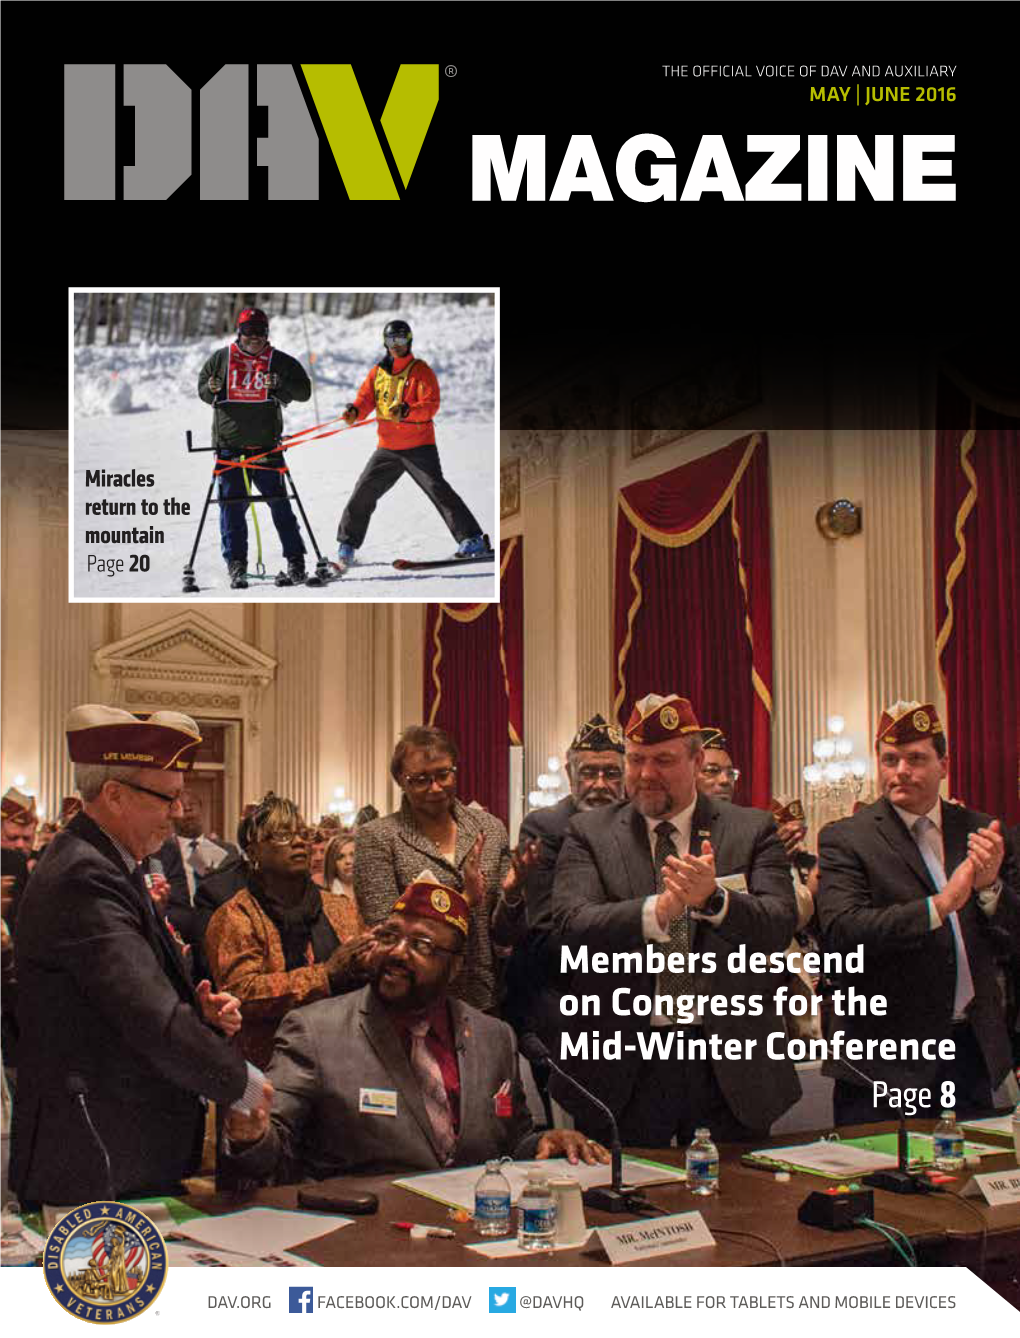 Members Descend on Congress for the Mid-Winter Conference Page 8